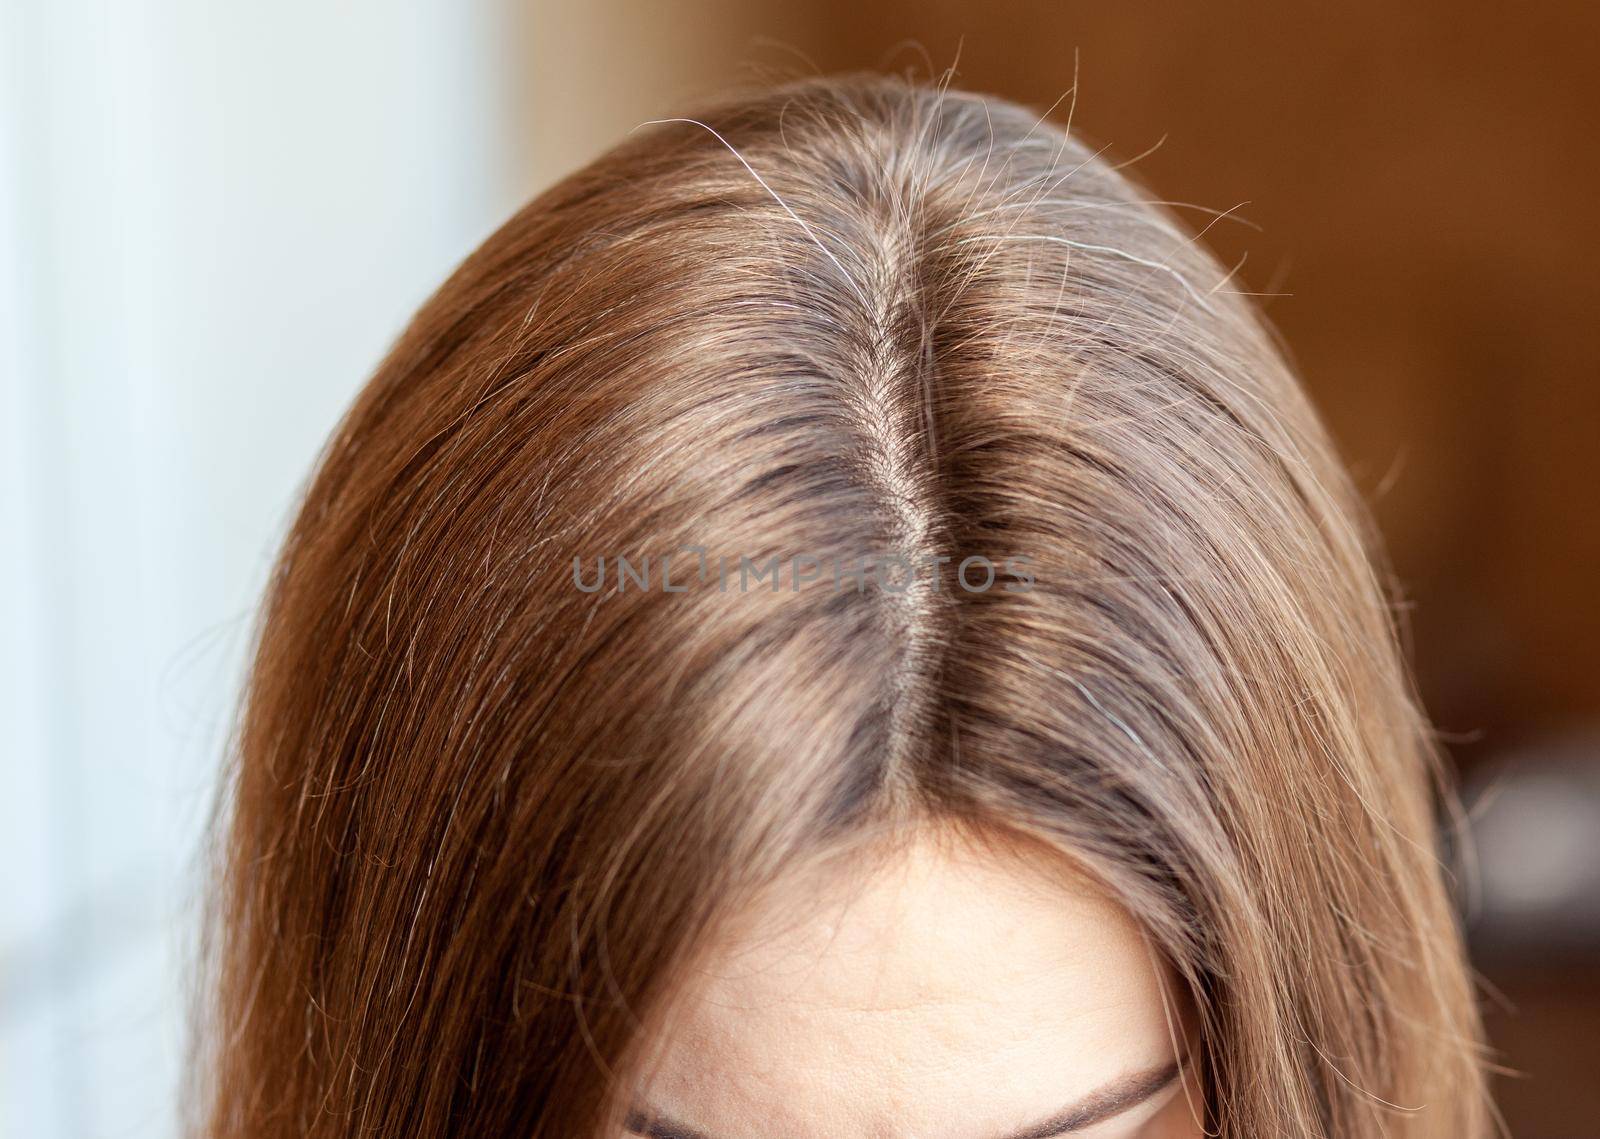 Parting of women's hair on the head. Hair care and care. Closeup of a woman's head with parted gray hair regrown roots becouse of quarantine